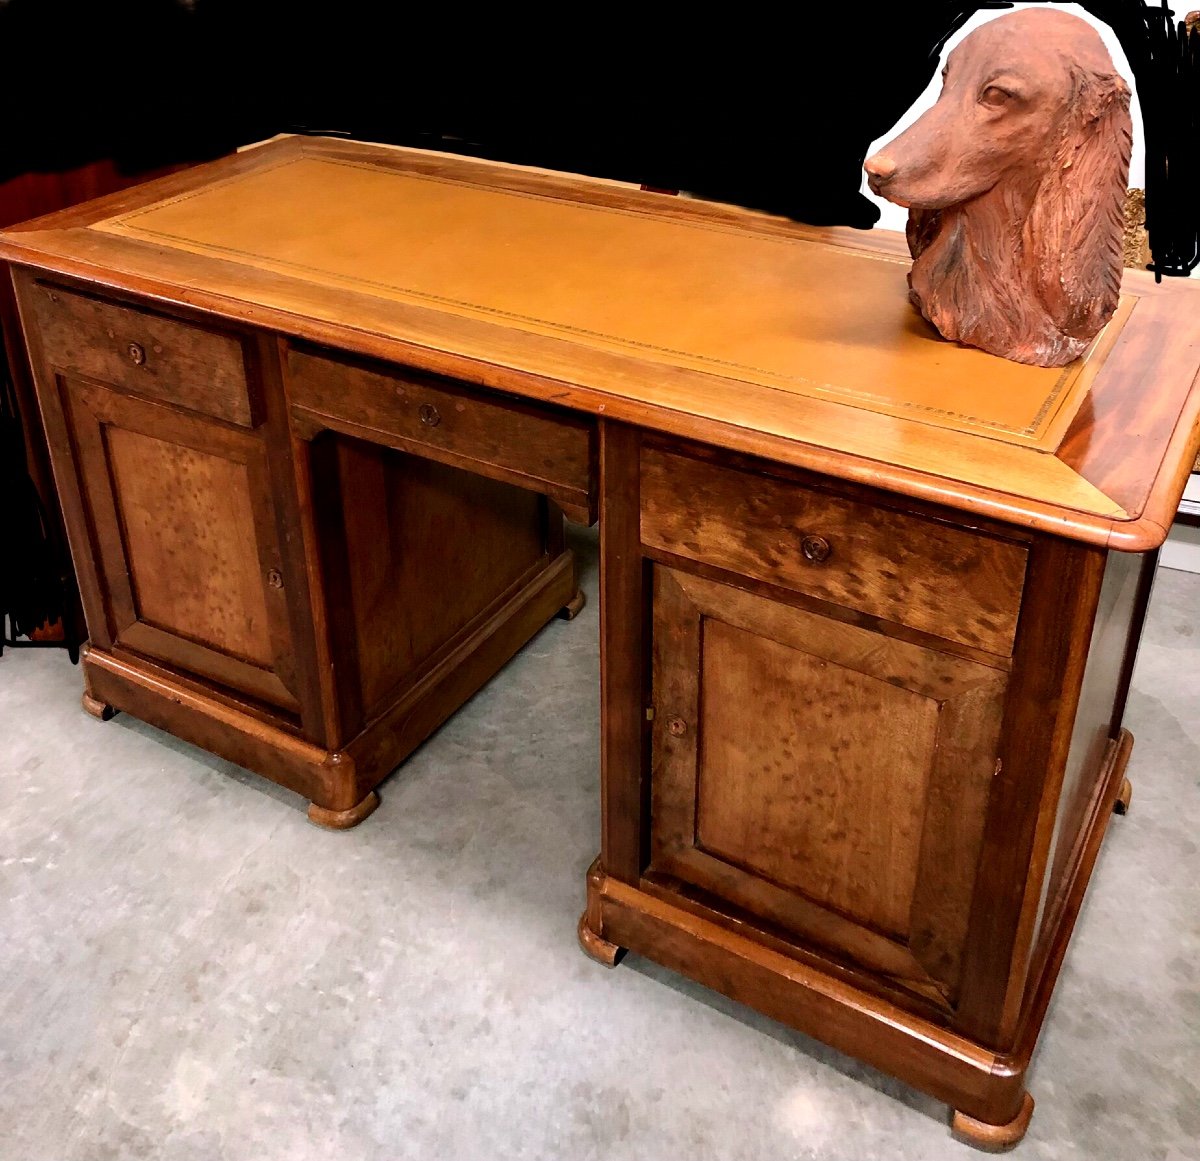 Speckled Mahogany Coffered Desk